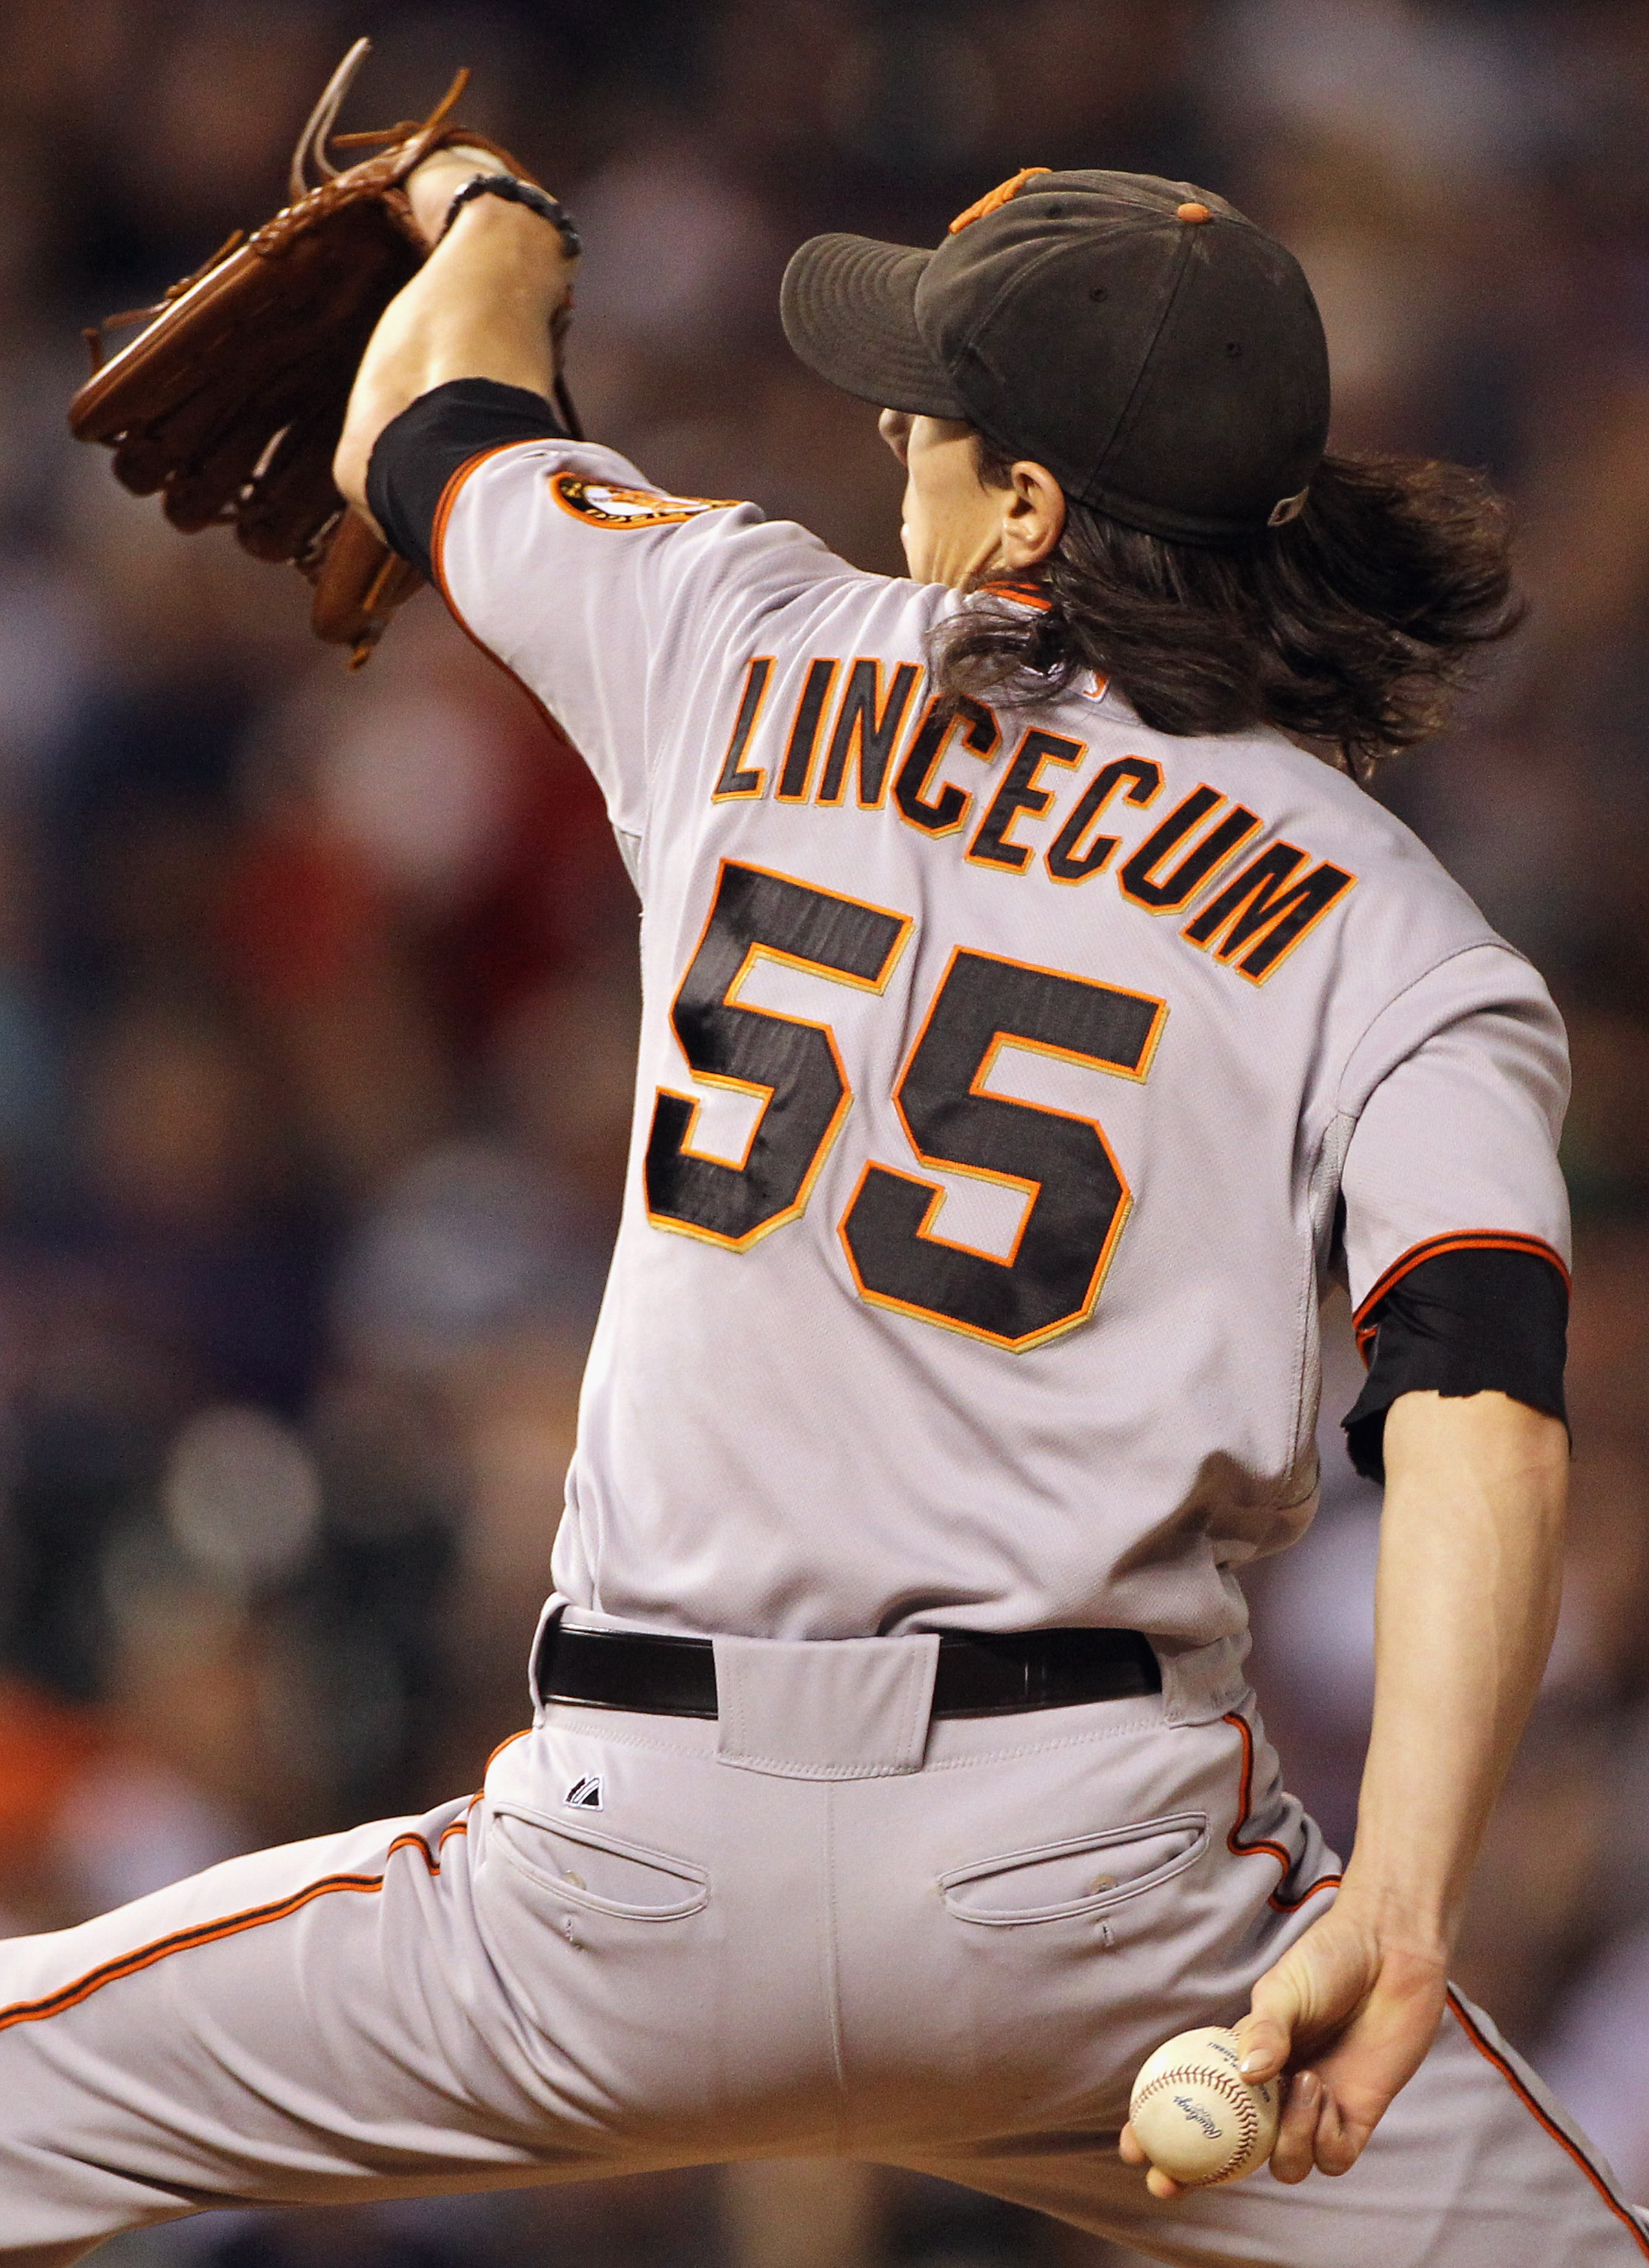 DENVER - SEPTEMBER 24:  Starting pitcher Tim Lincecum #55 of the San Francisco Giants delivers against the Colorado Rockies at Coors Field on September 24, 2010 in Denver, Colorado. Lincecum earned the win as the Giants defeated the Rockies 2-1.  (Photo b